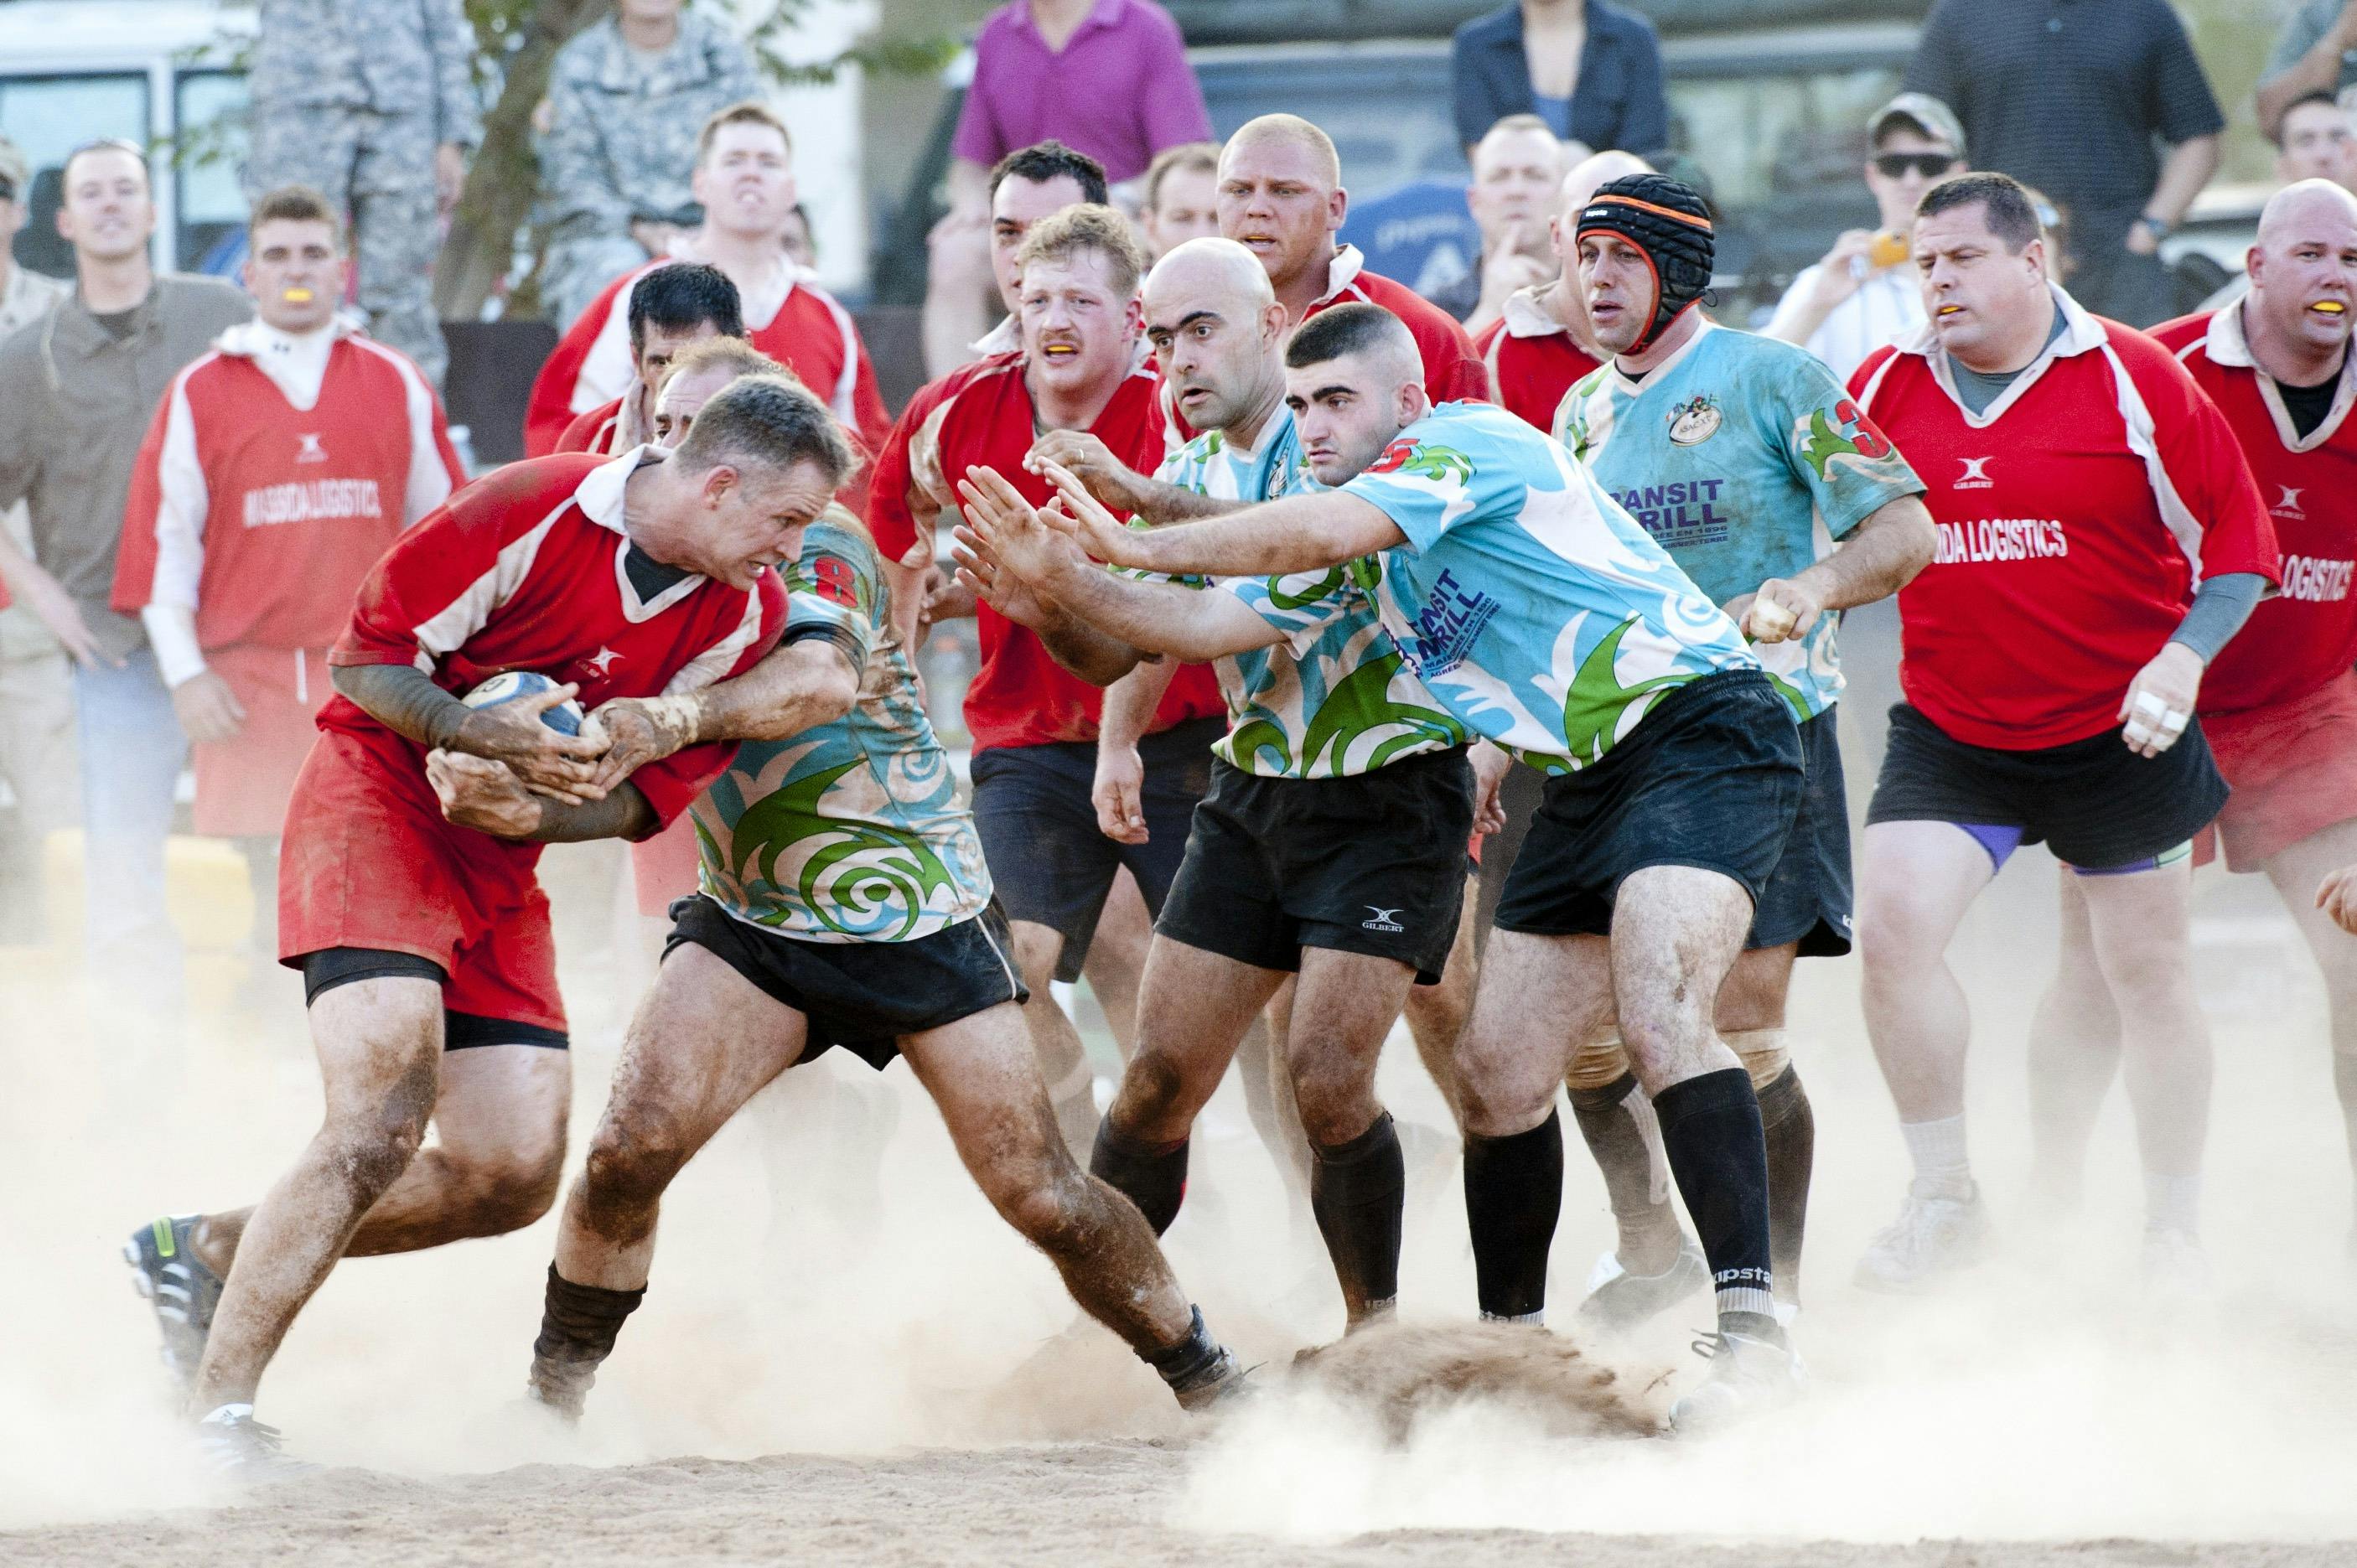 People Playing Rugby Game · Free Stock Photo